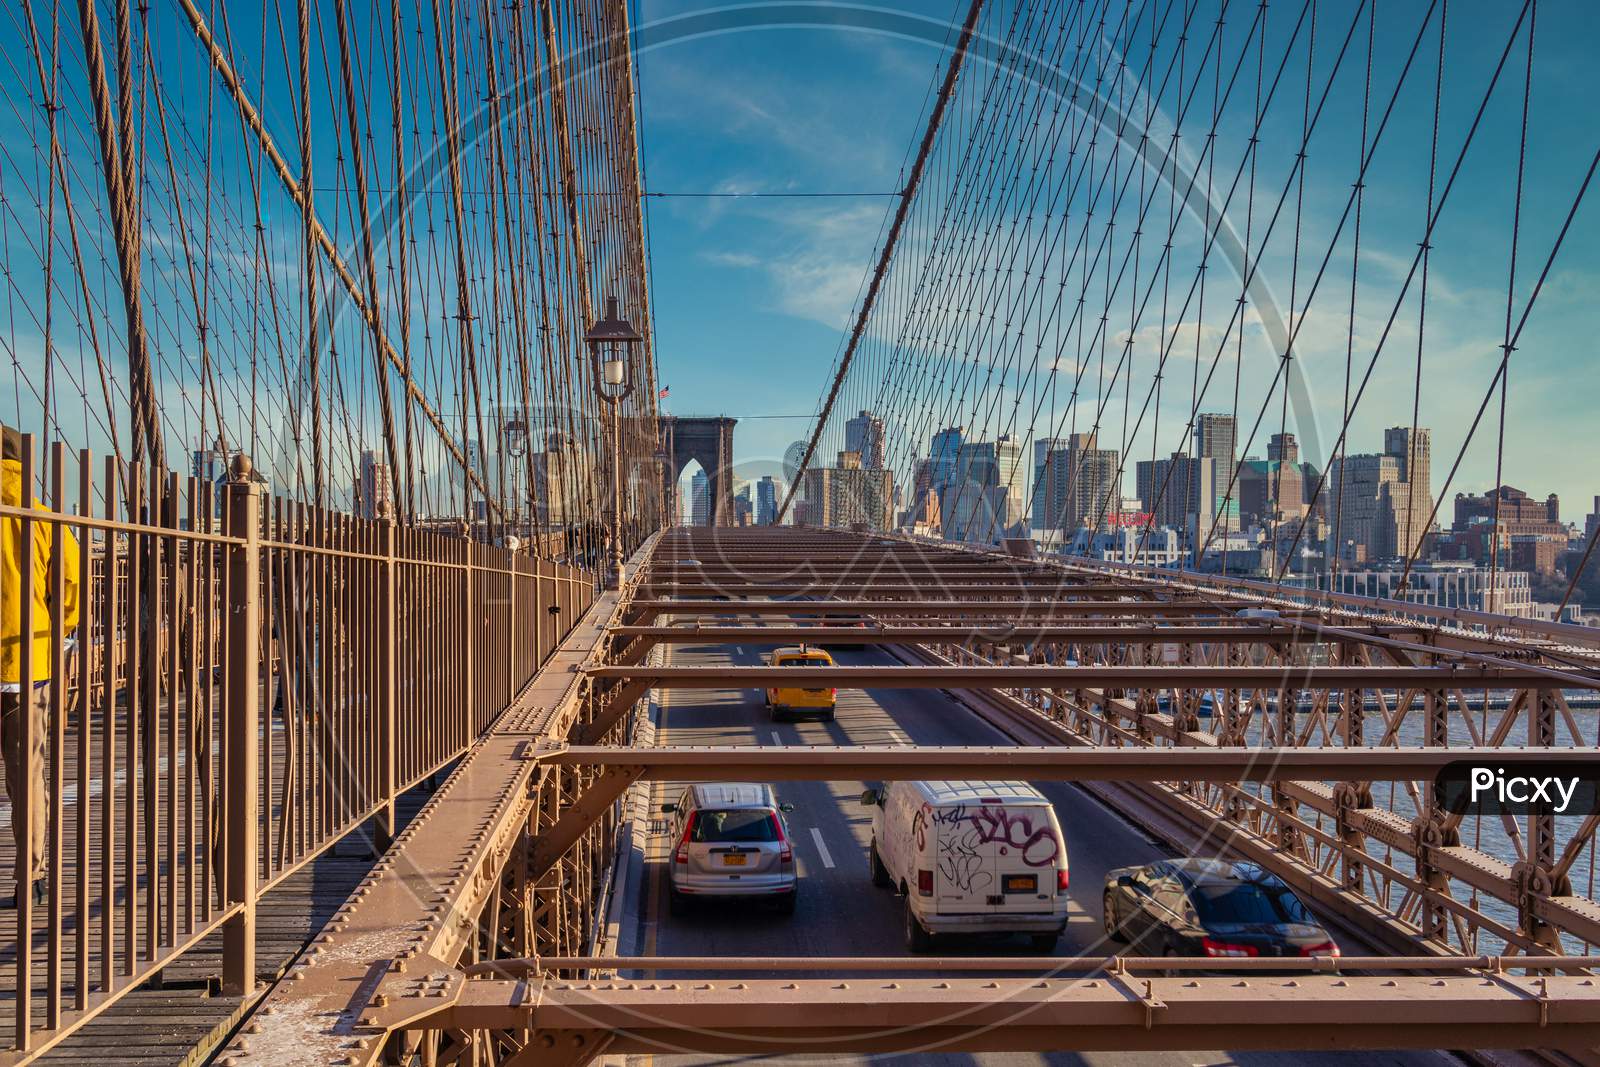 Brooklyn Bridge daylight view with cars moving on the bridge ,skyline and clouds in sky in background